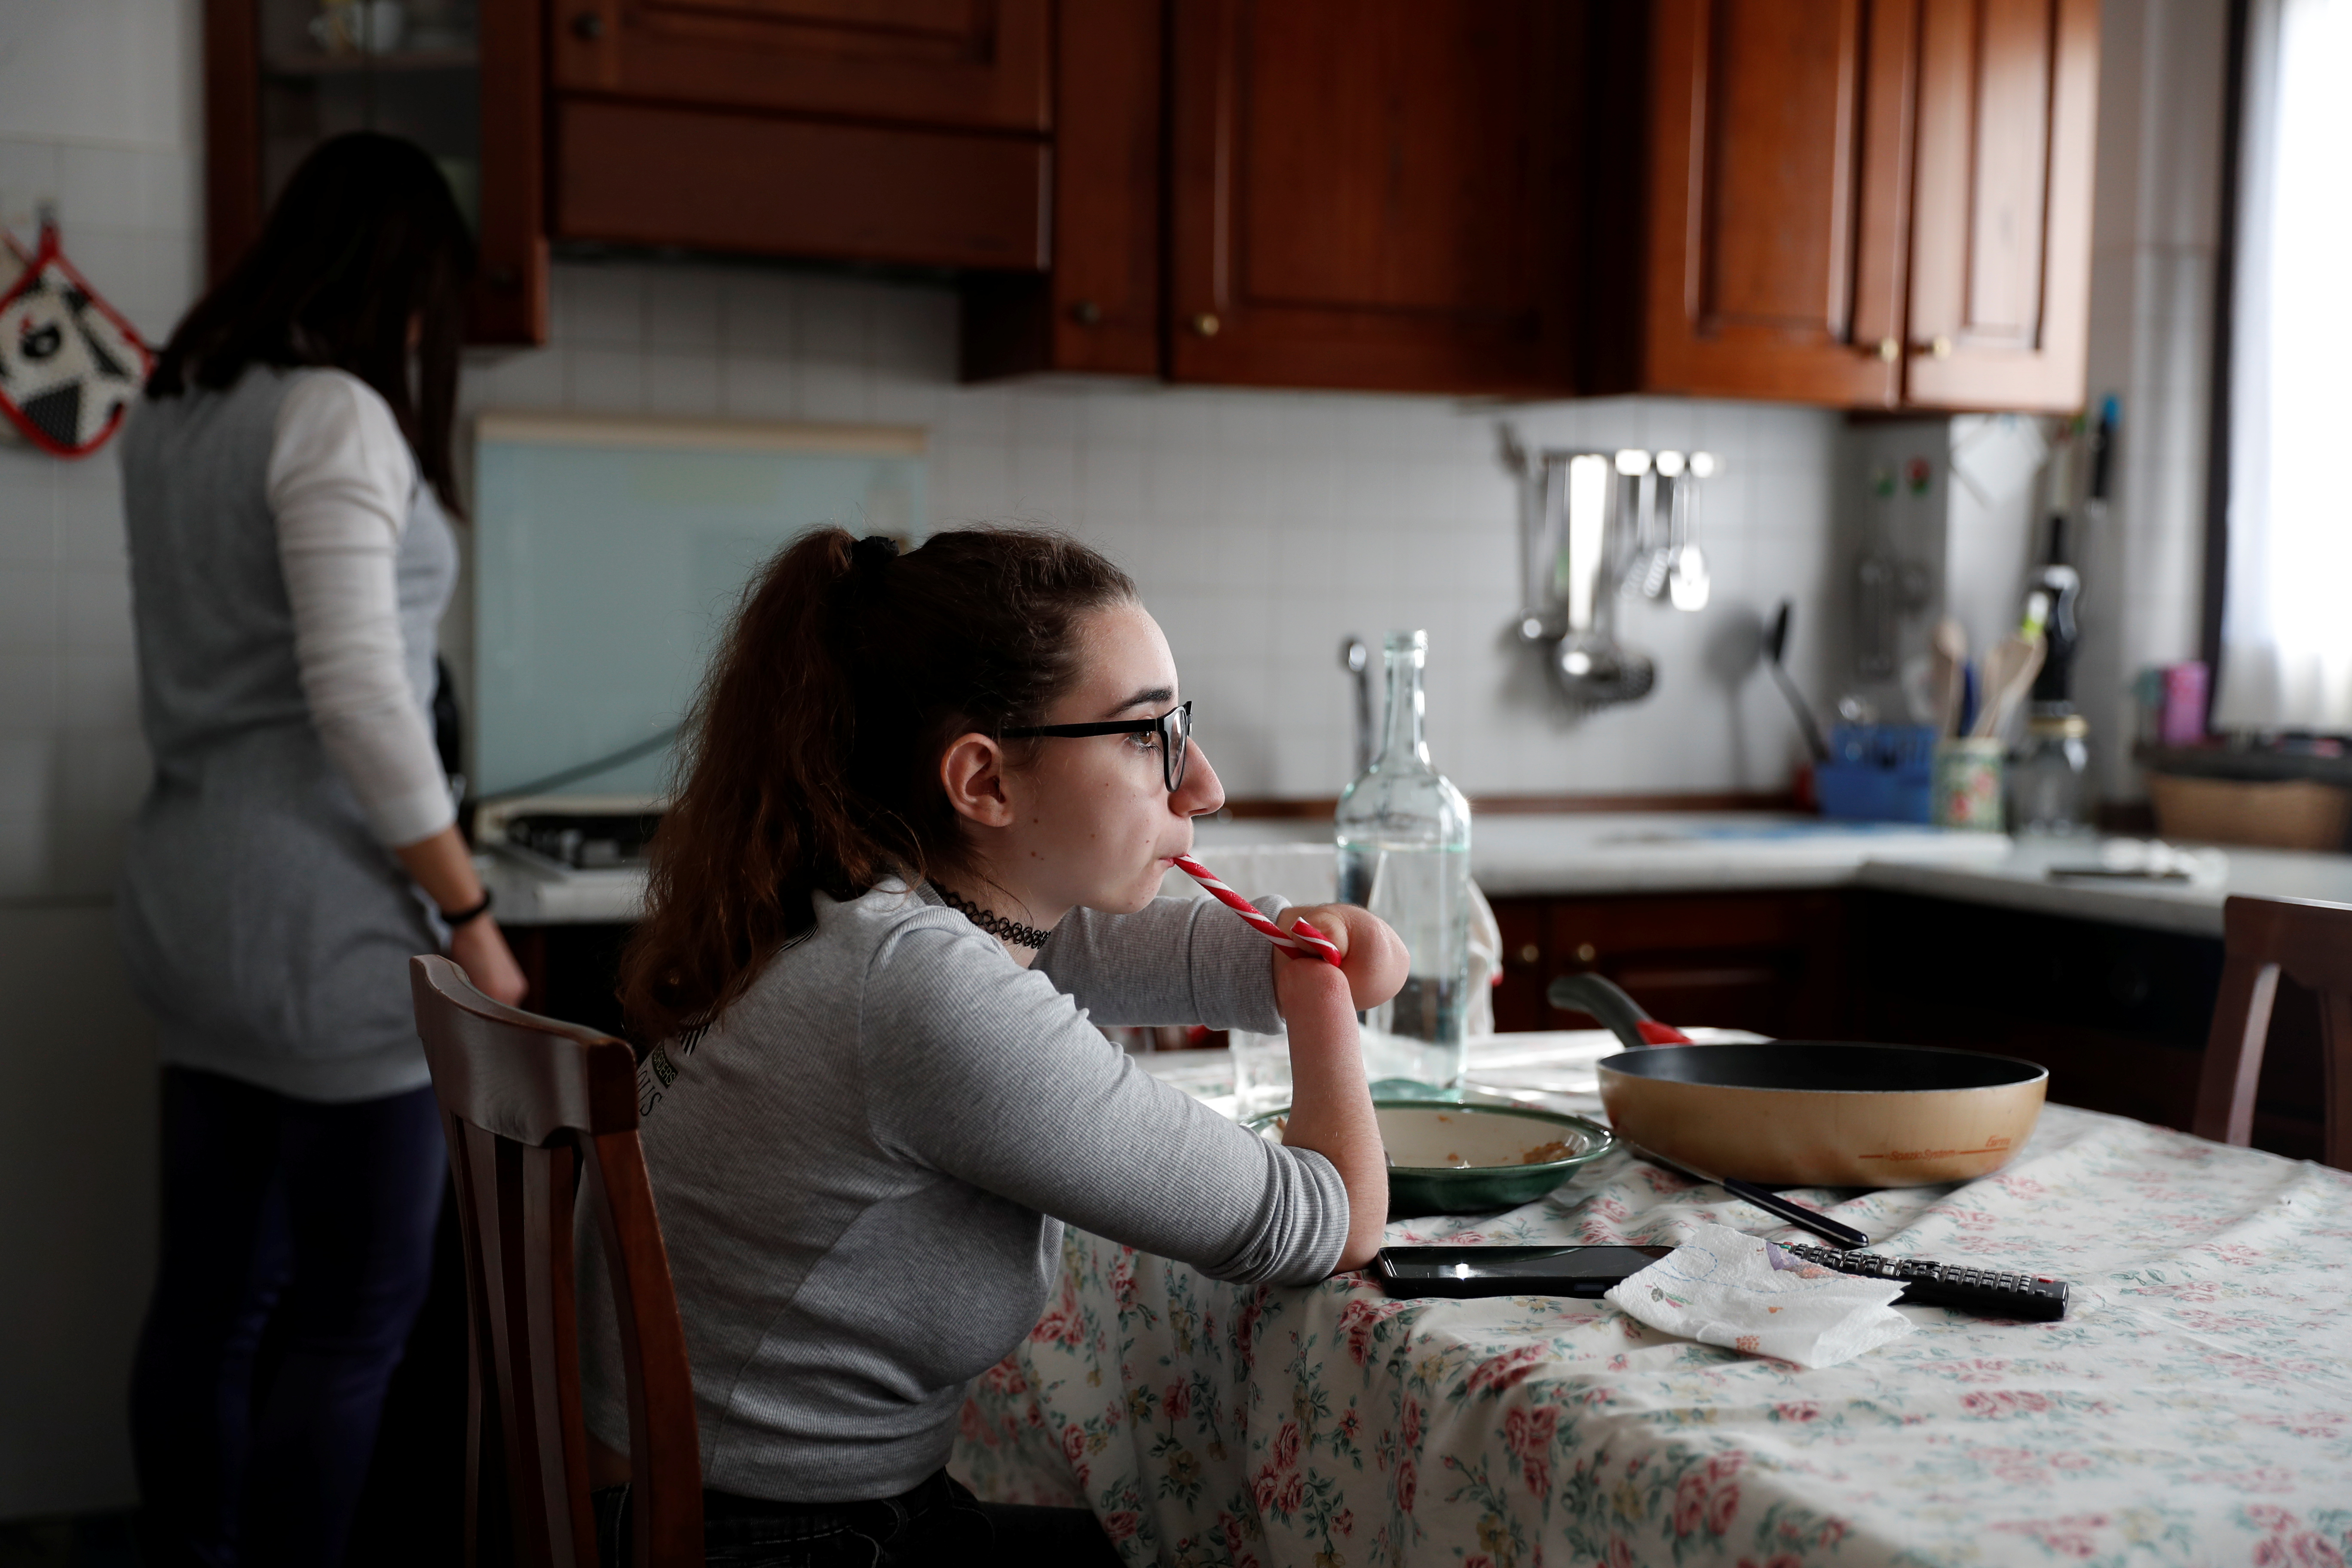 Francesca Cesarini, 15, eats candy after lunch at her home in Magione, near Perugia, Italy, November 15, 2021. Cesarini was born with no hands and with only one leg so her mother was more than a bit surprised when her daughter told her she wanted to be an acrobatic pole dancer. 